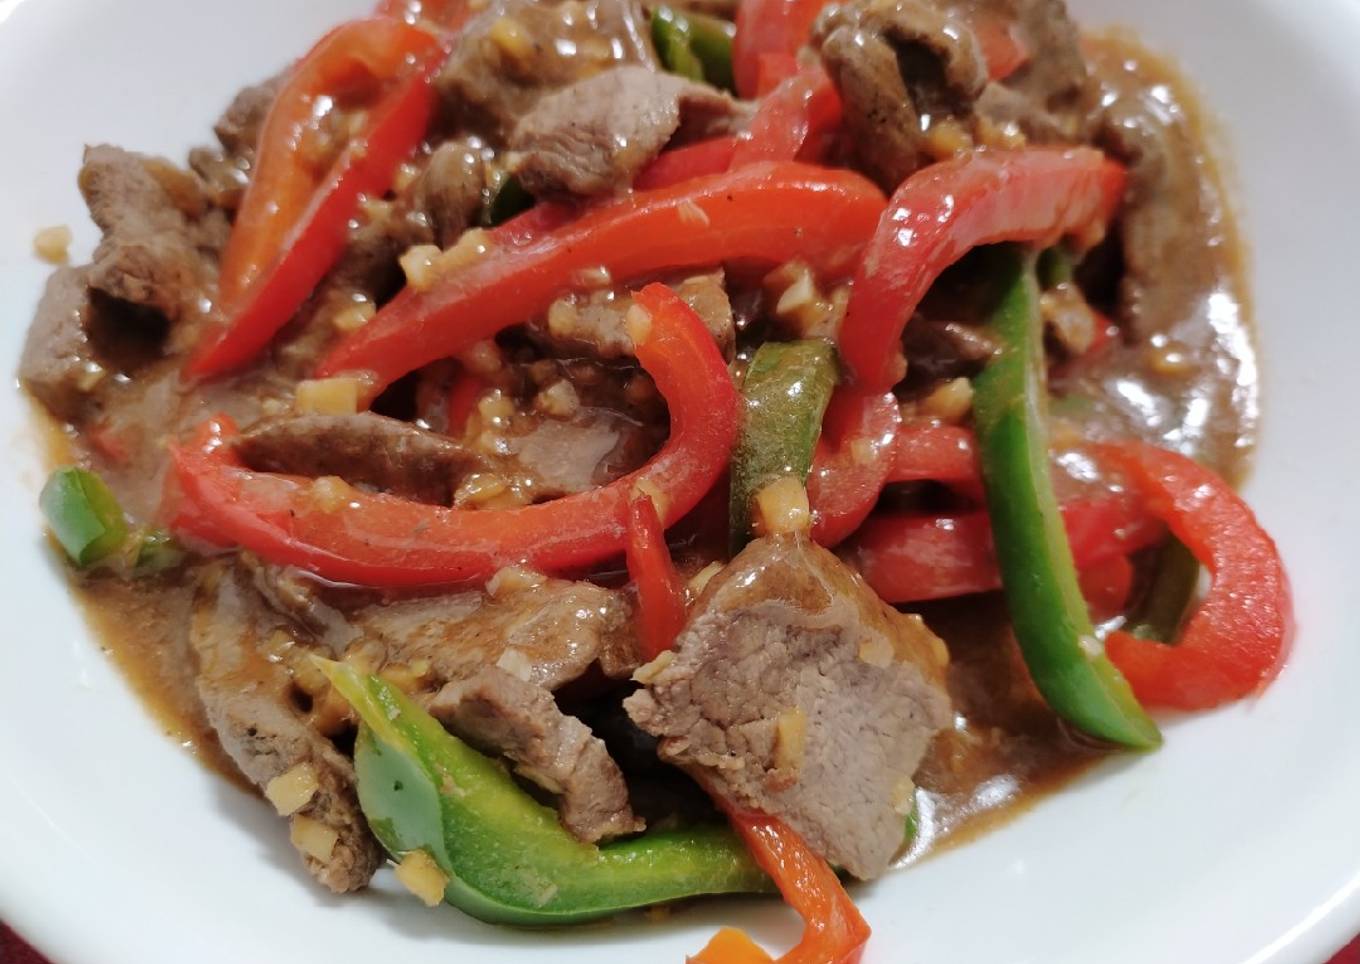 Beef and peppers